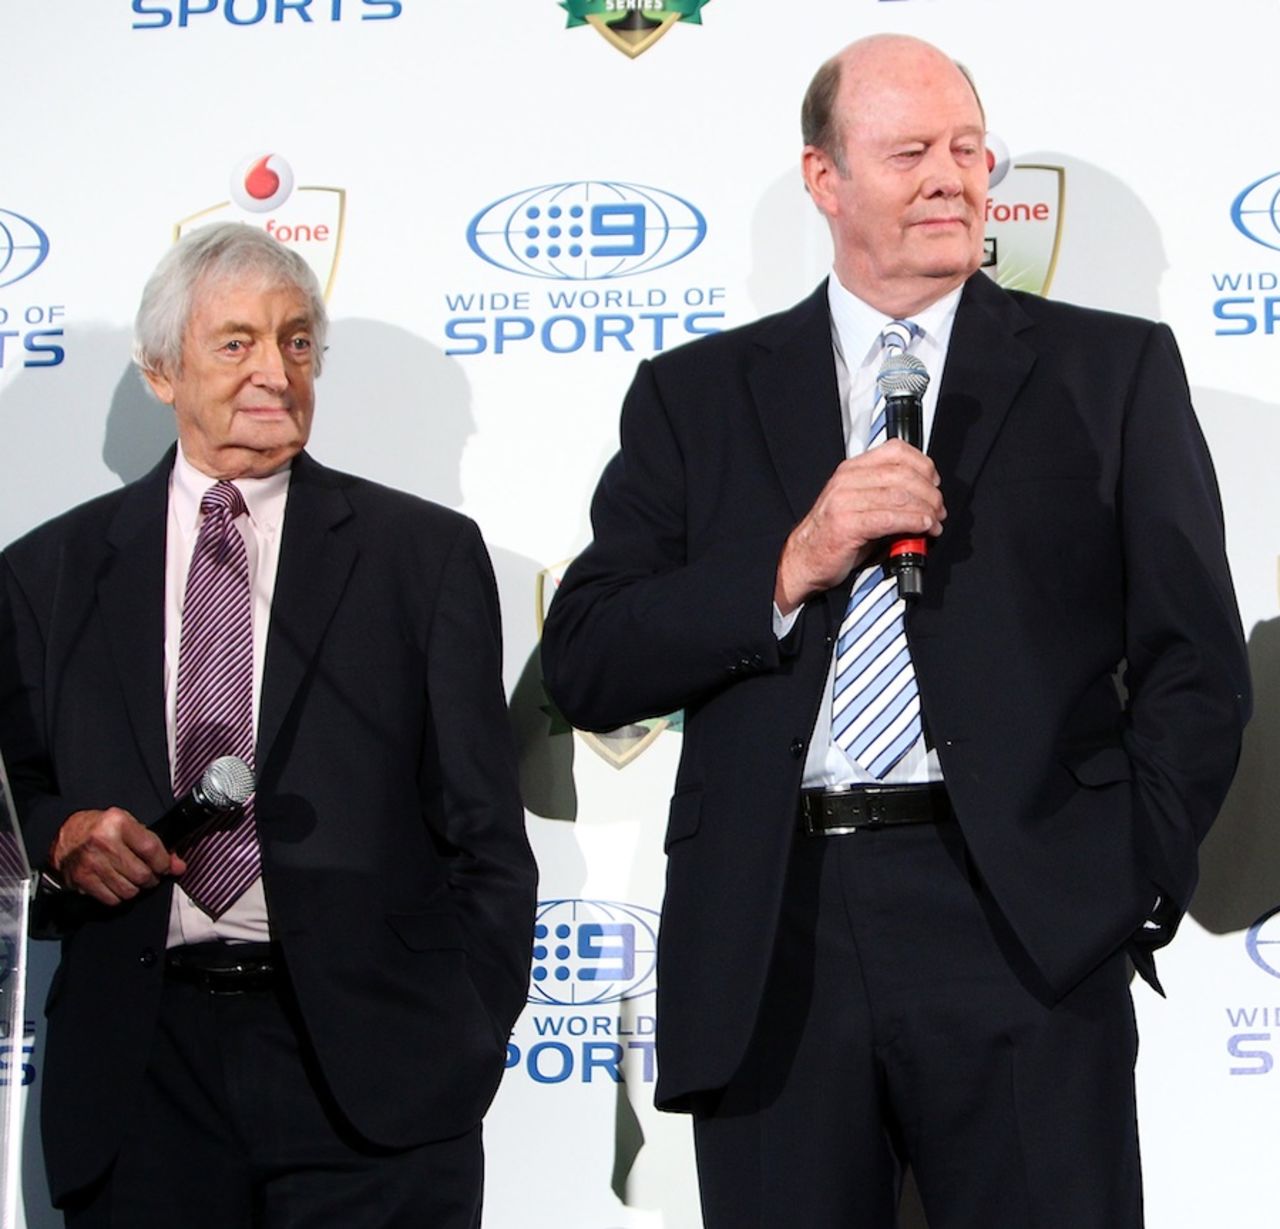 Richie Benaud and Tony Greig at the launch of the Ashes, Sydney, November 16, 2010